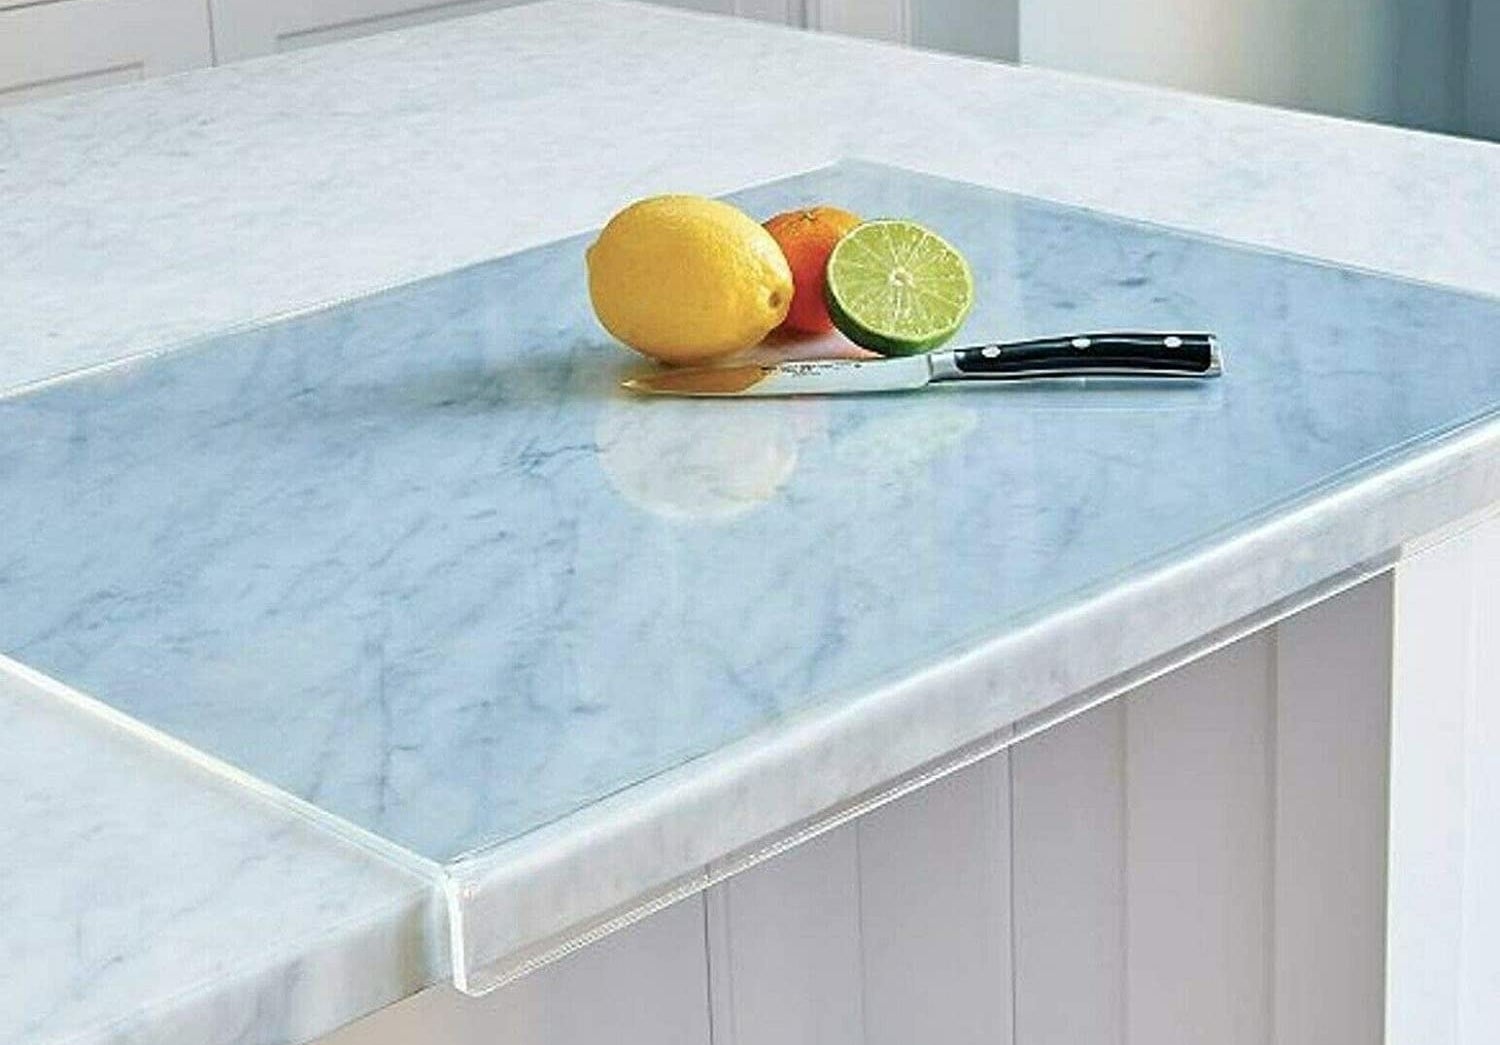 Silicone Mats For Kitchen Counter, Large Silicone Countertop Protector ,  Nonskid Heat Resistant Desk Saver Pad Jb